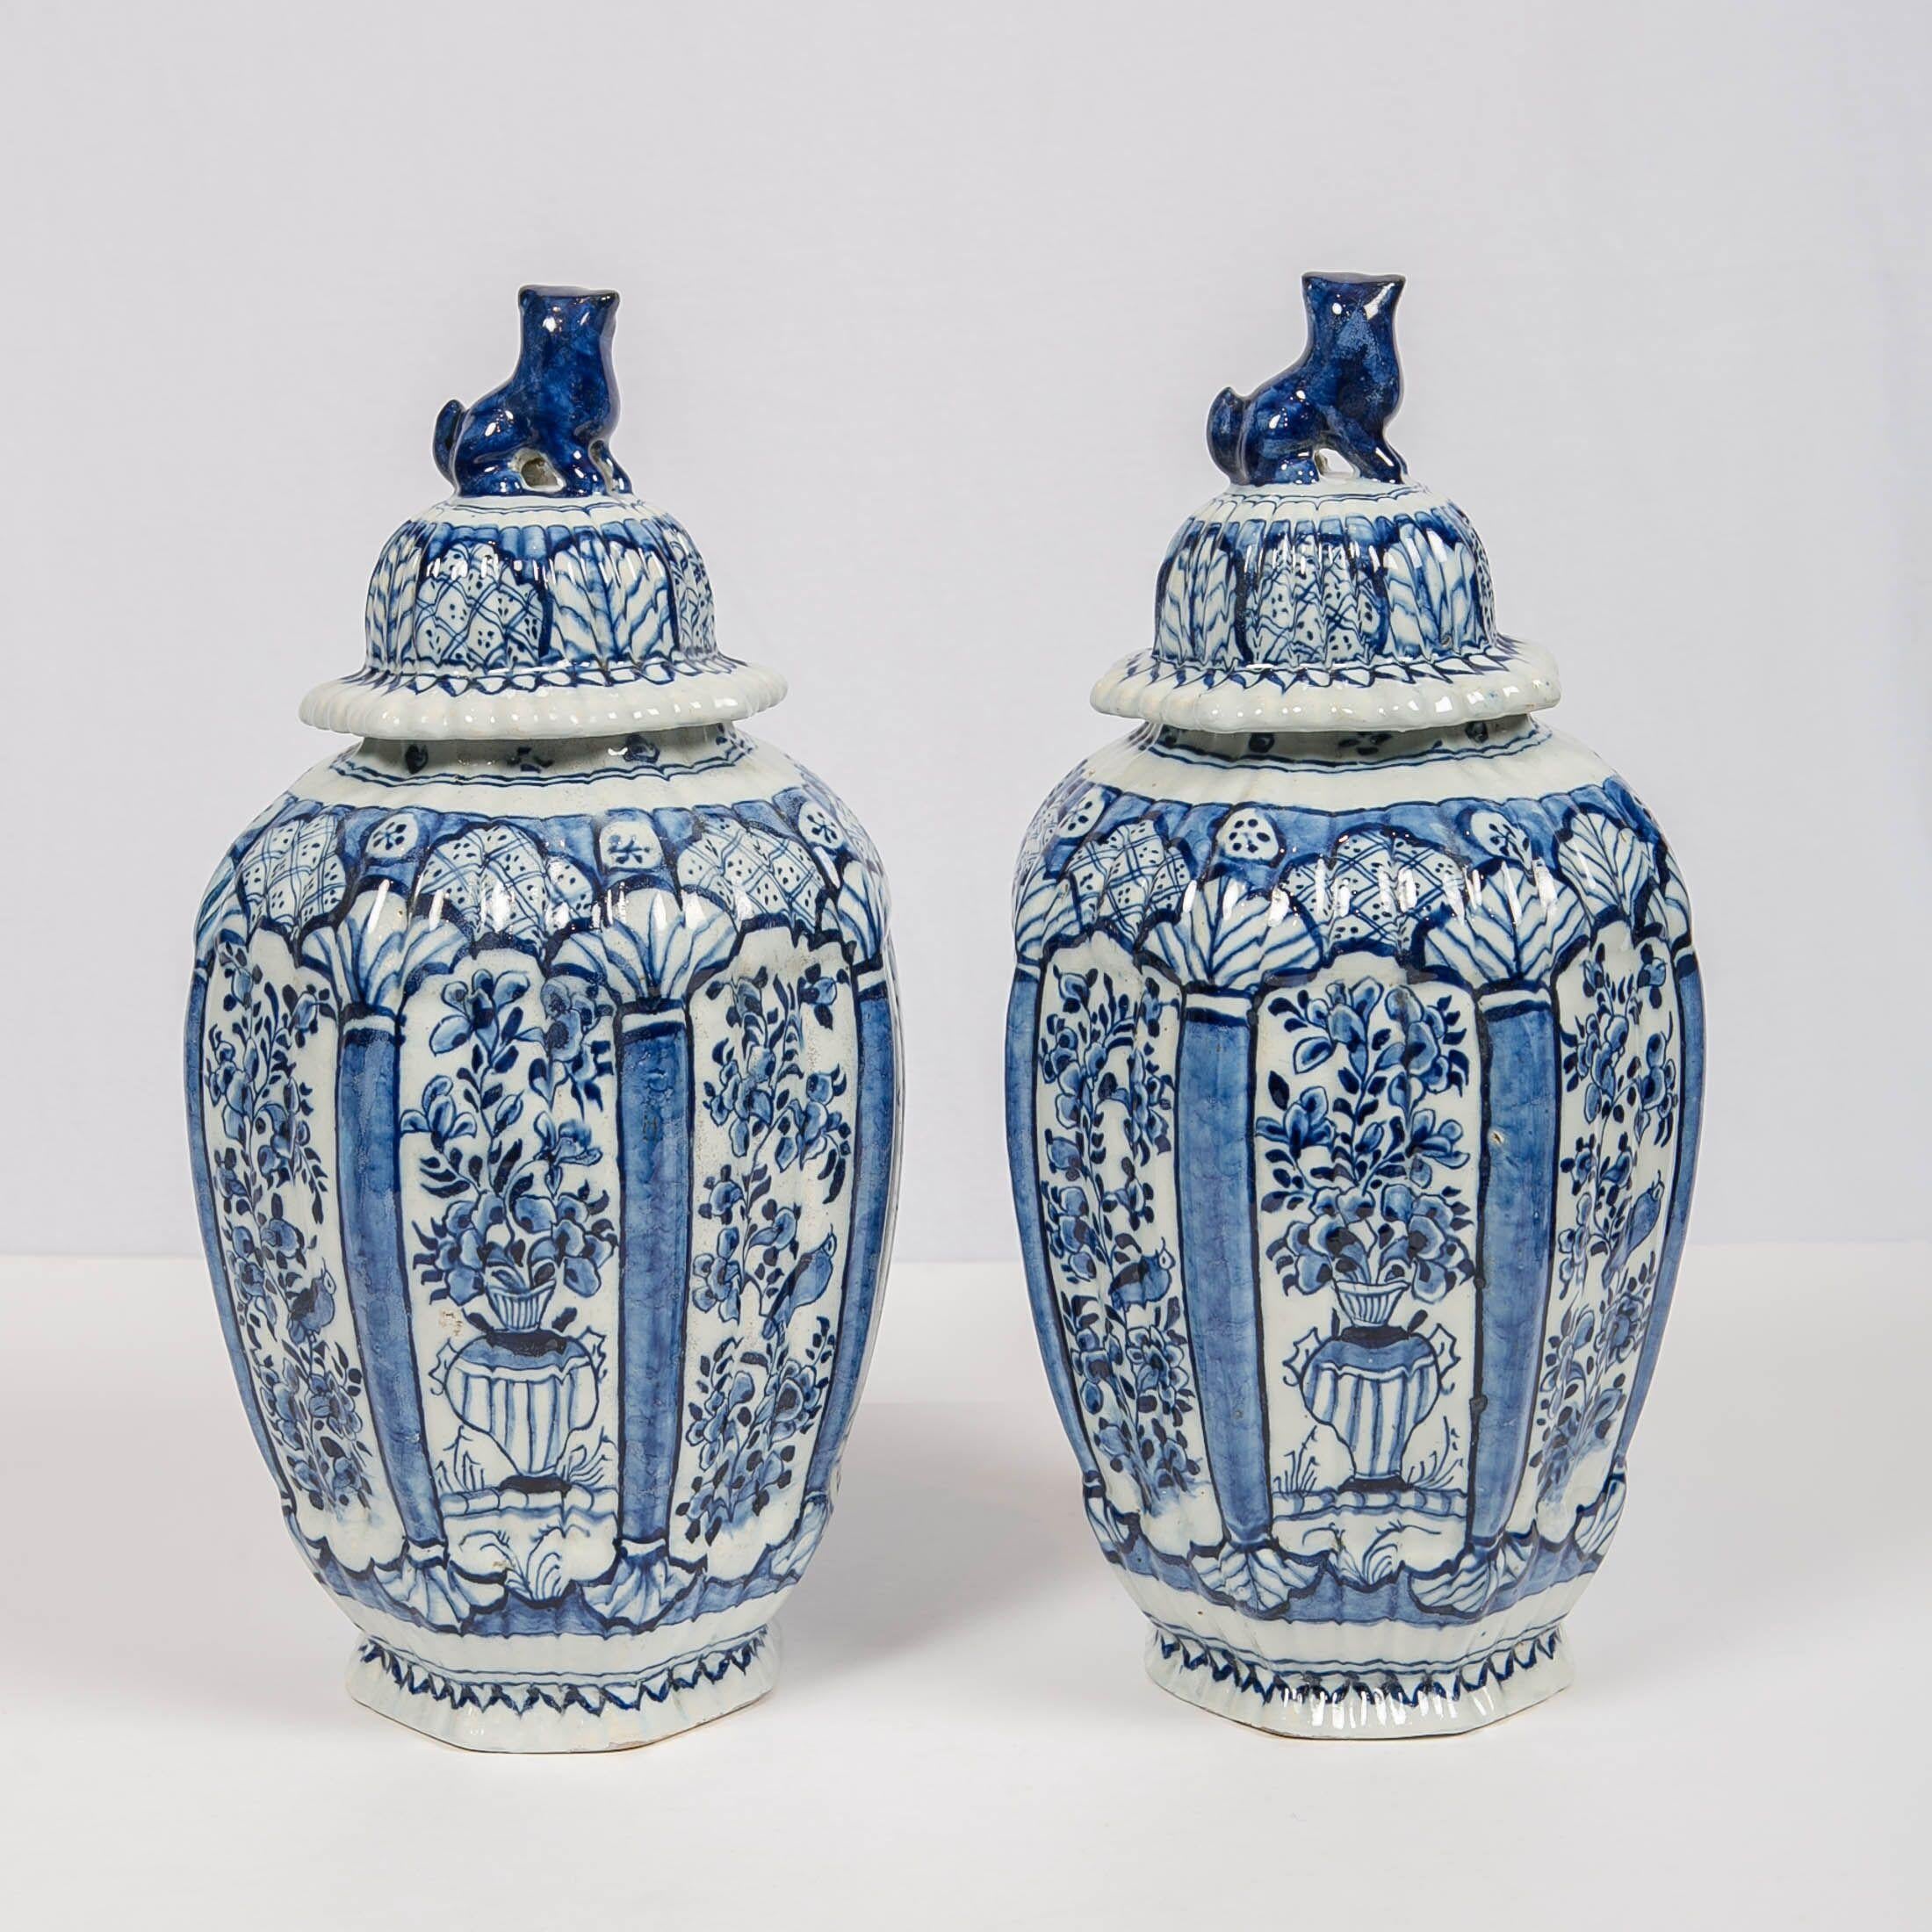 Rococo Delft Blue and White Jars with Lion Finials Made circa 1780